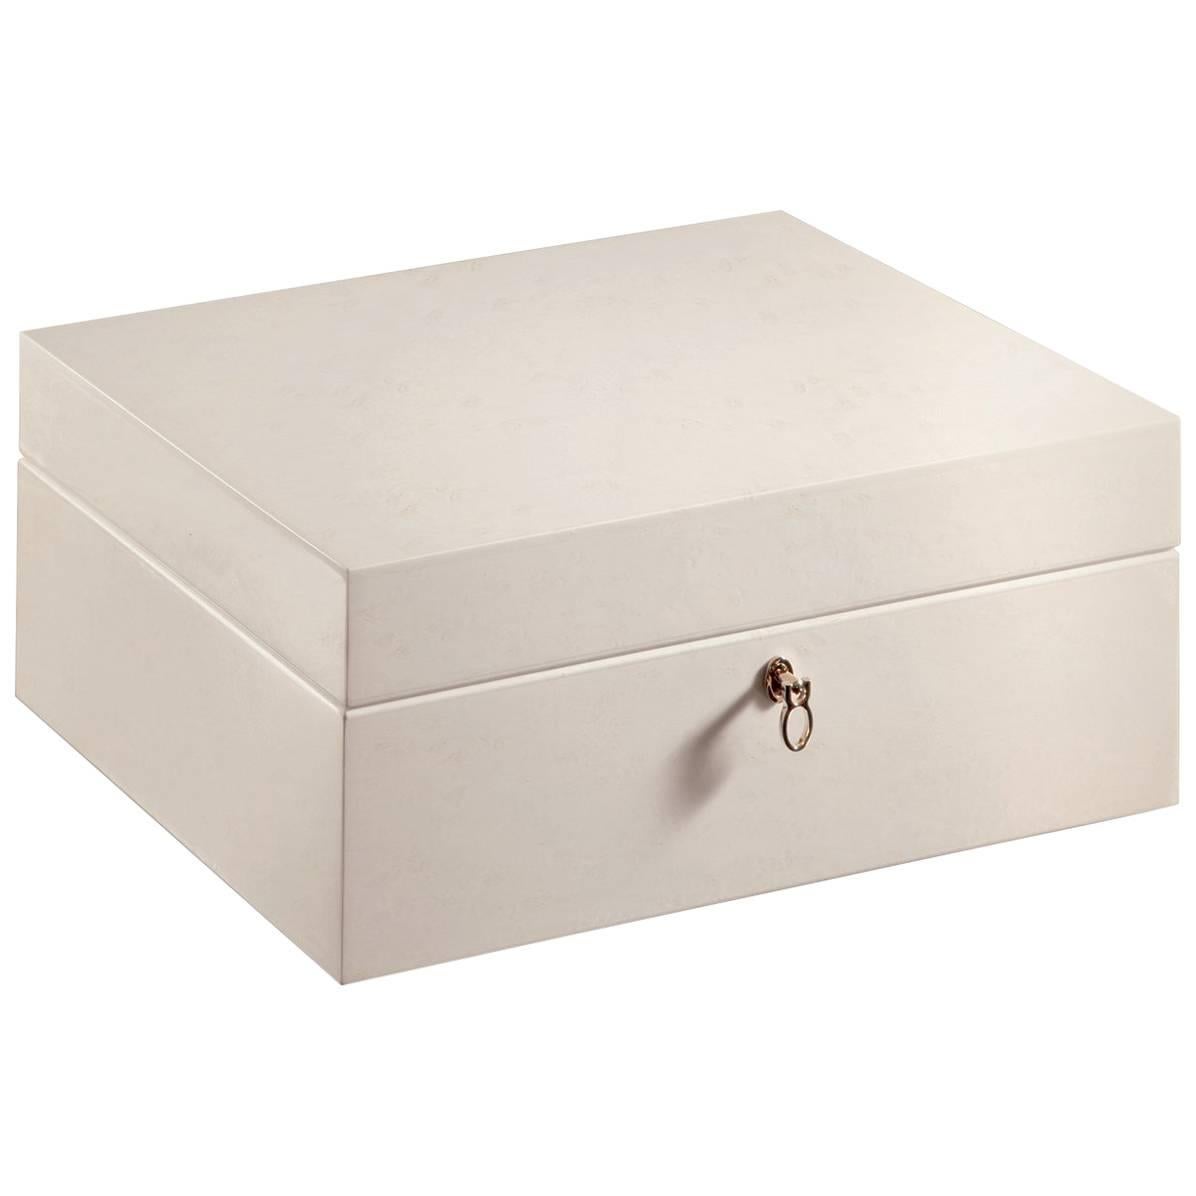 Polished White Jewel Box in Bird's-Eye Maple with Gold-Plated Hardware, Agresti